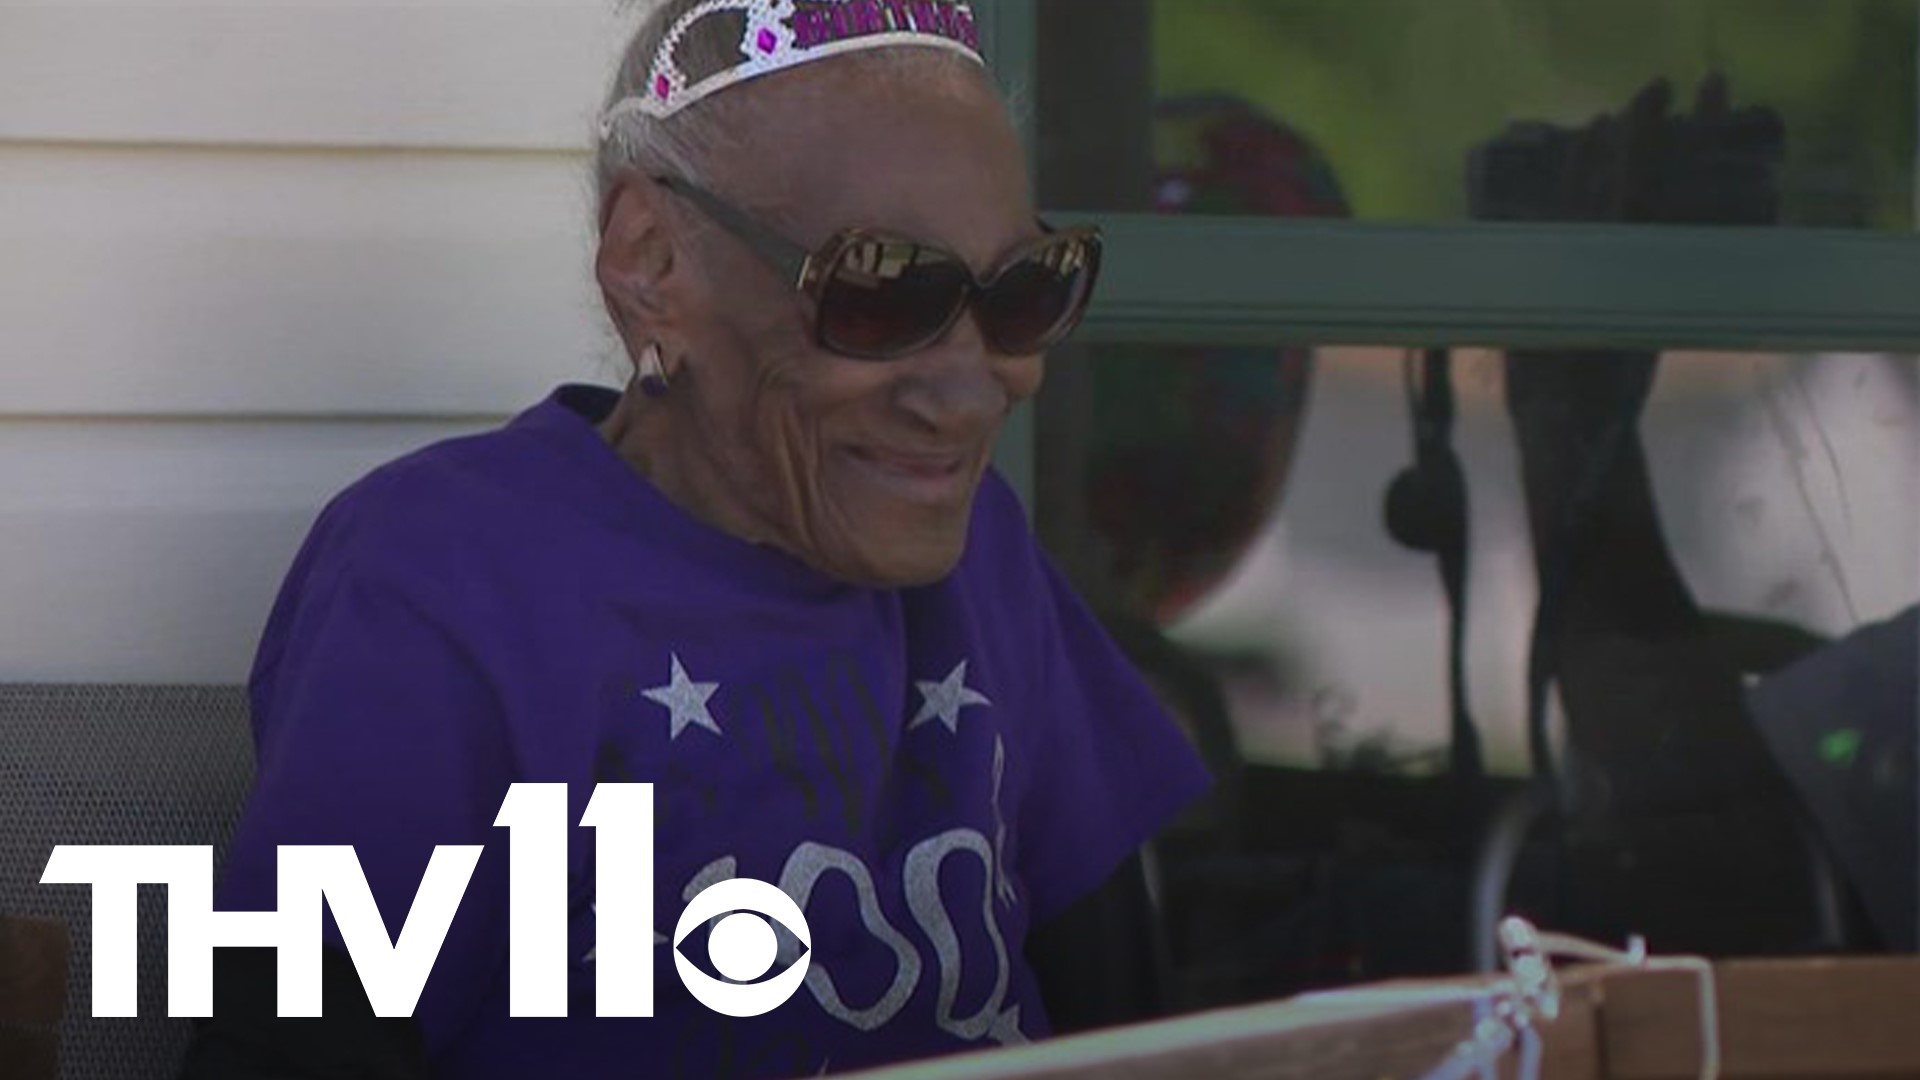 Friends and relatives of Ms. Shirley Lee honored her with a parade fit for a queen to celebrate her 100th birthday.